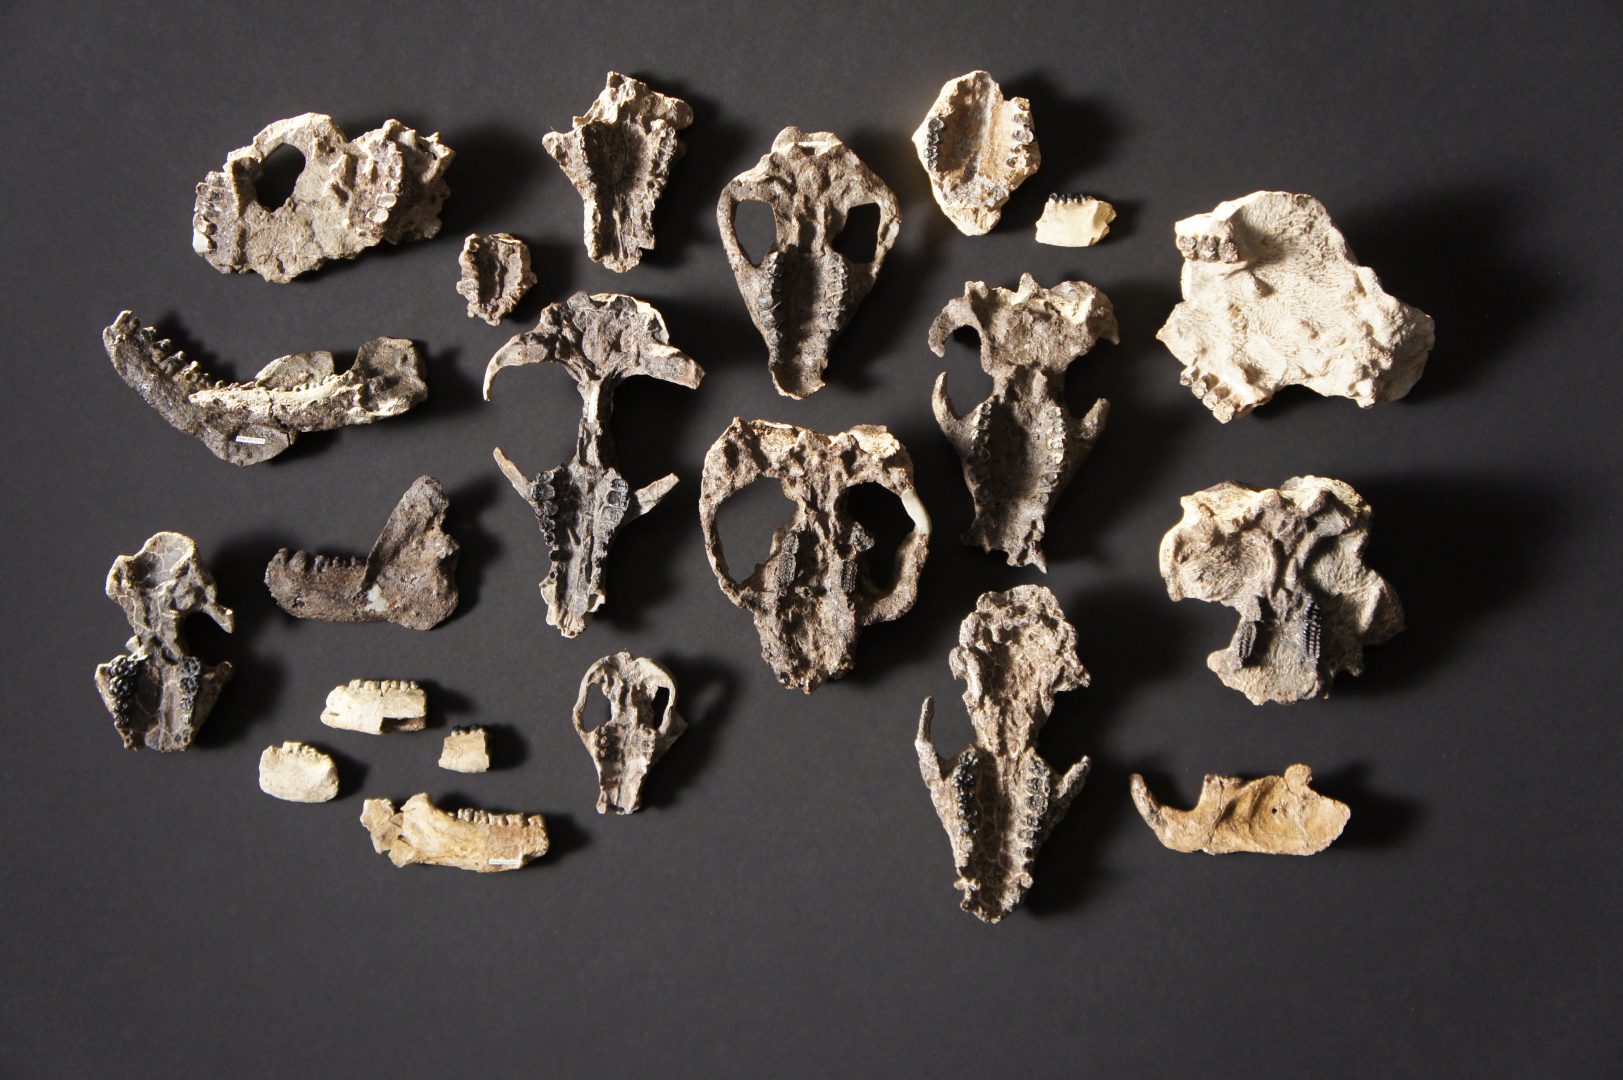 An overhead shot of the prepared mammal skull fossils and lower jaw retrieved from Corral Bluffs